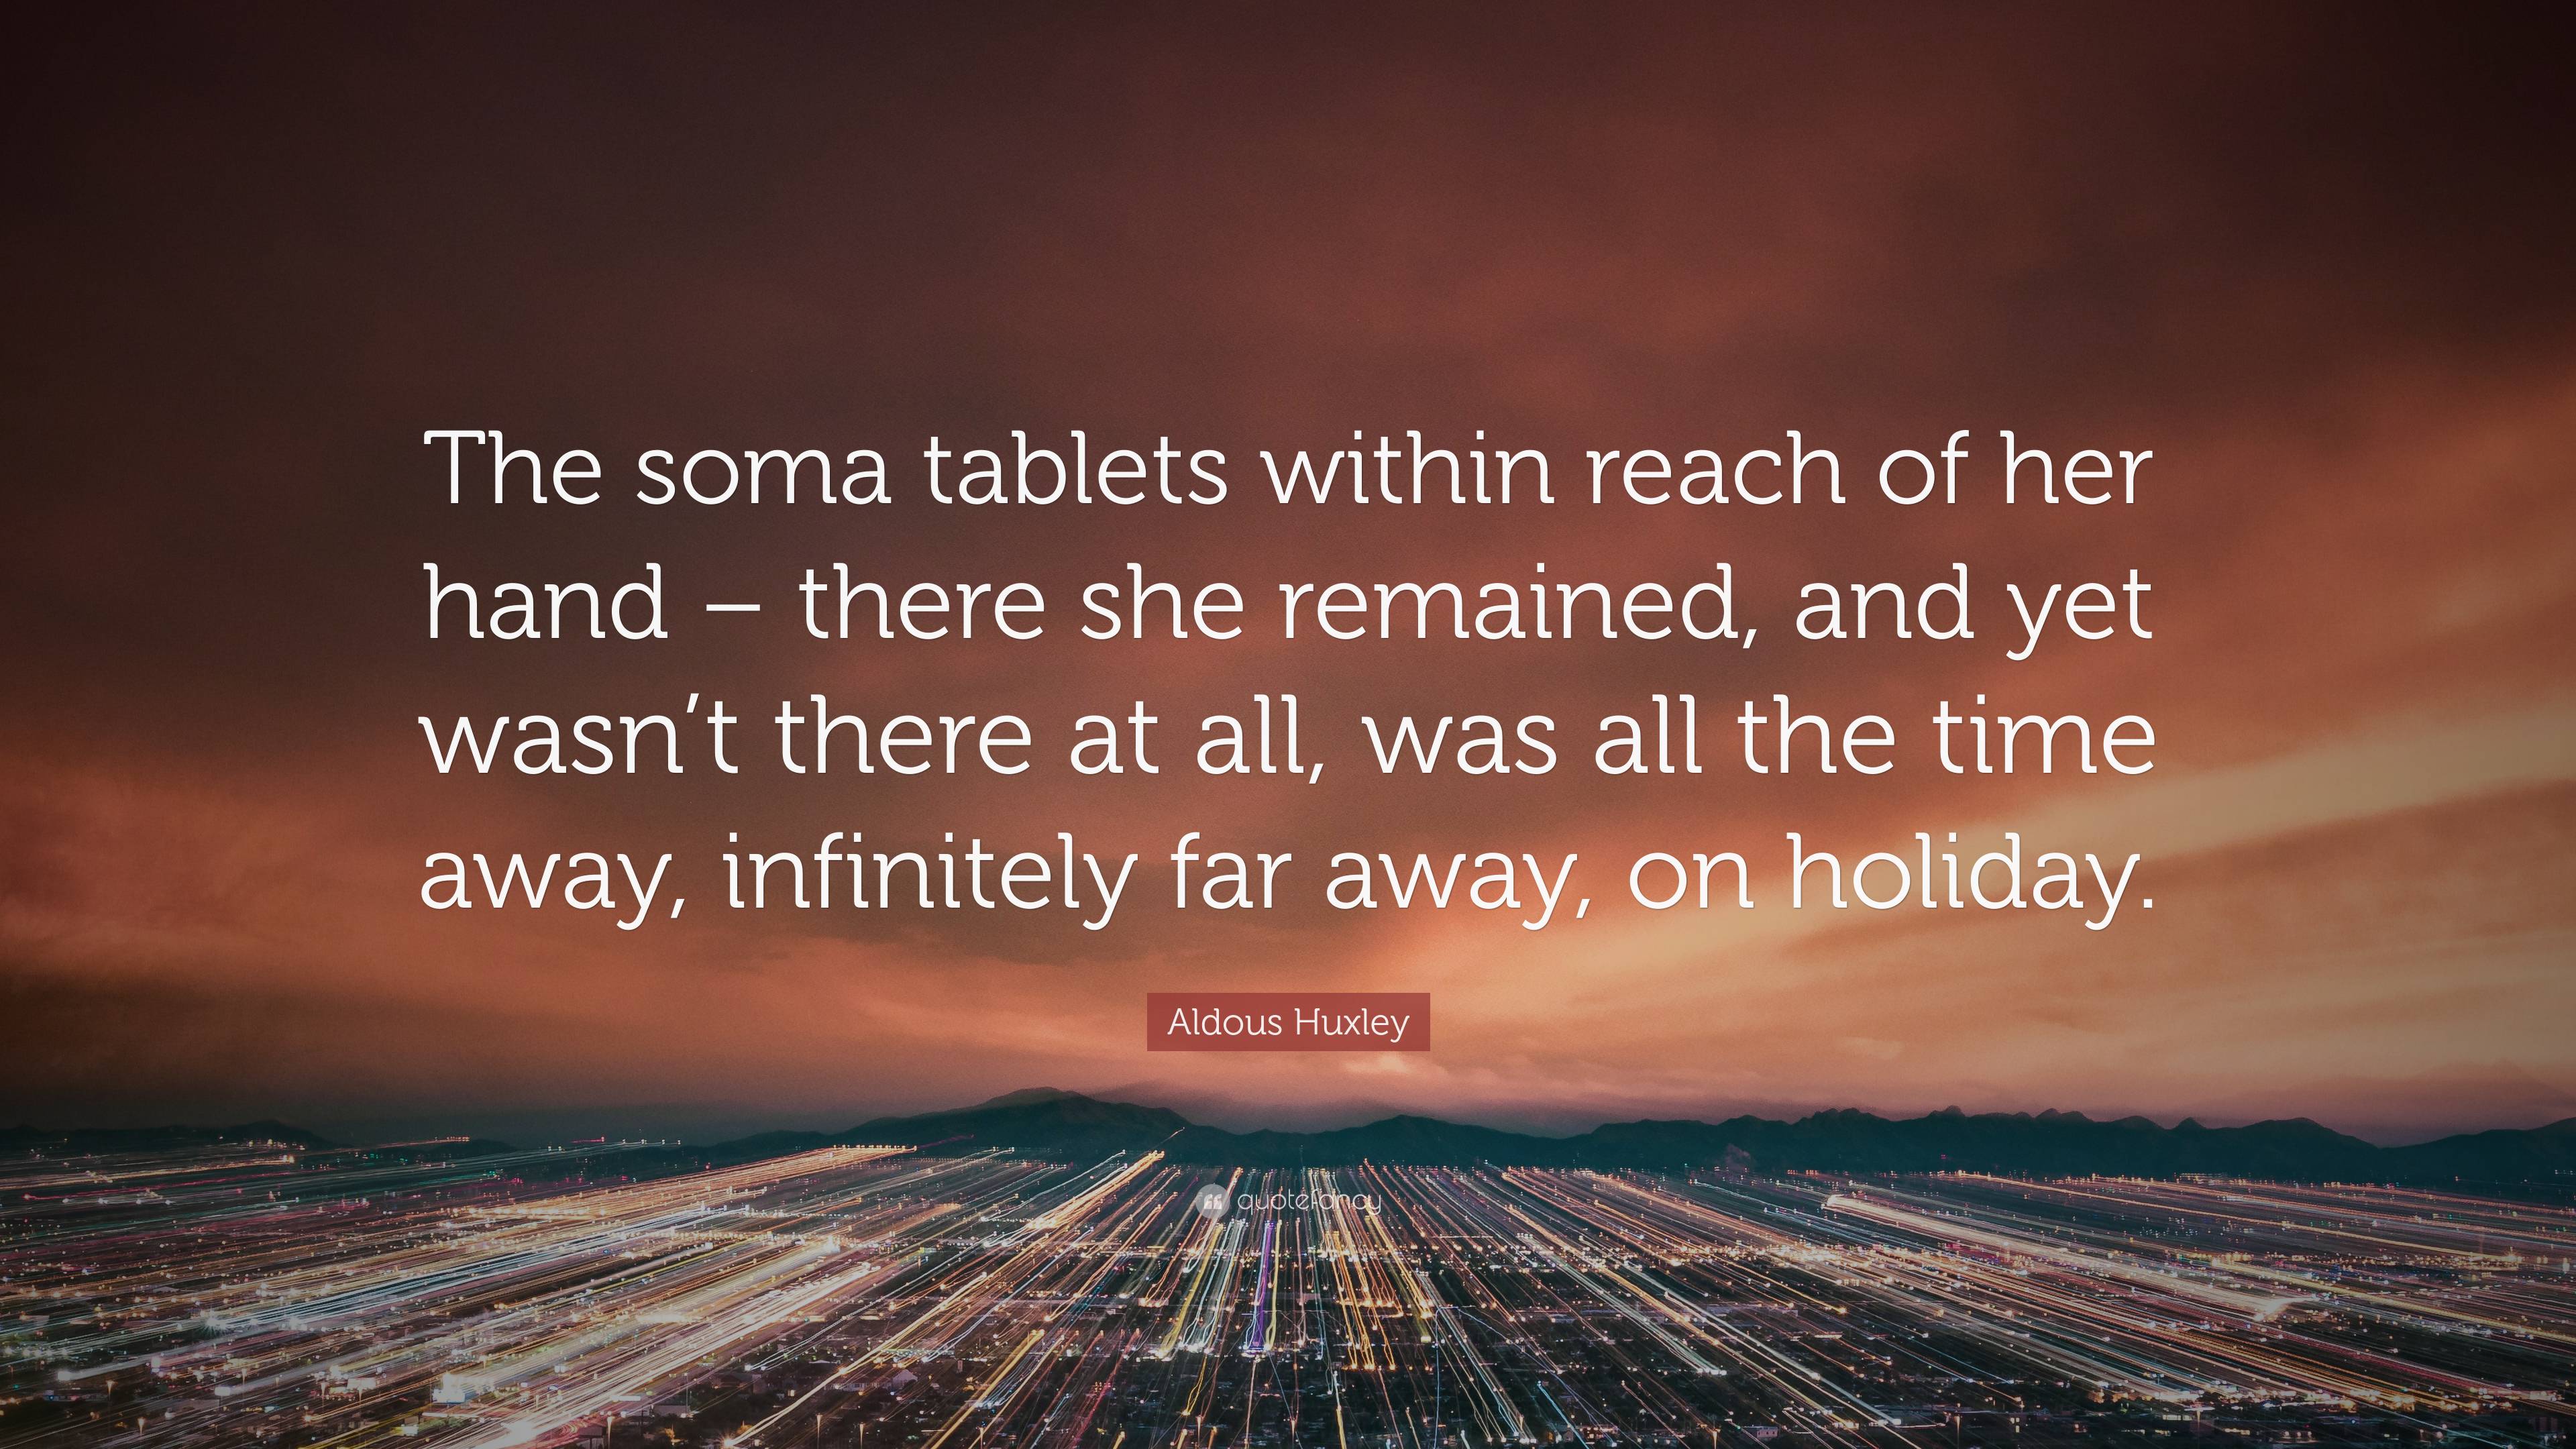 https://quotefancy.com/media/wallpaper/3840x2160/7116865-Aldous-Huxley-Quote-The-soma-tablets-within-reach-of-her-hand.jpg